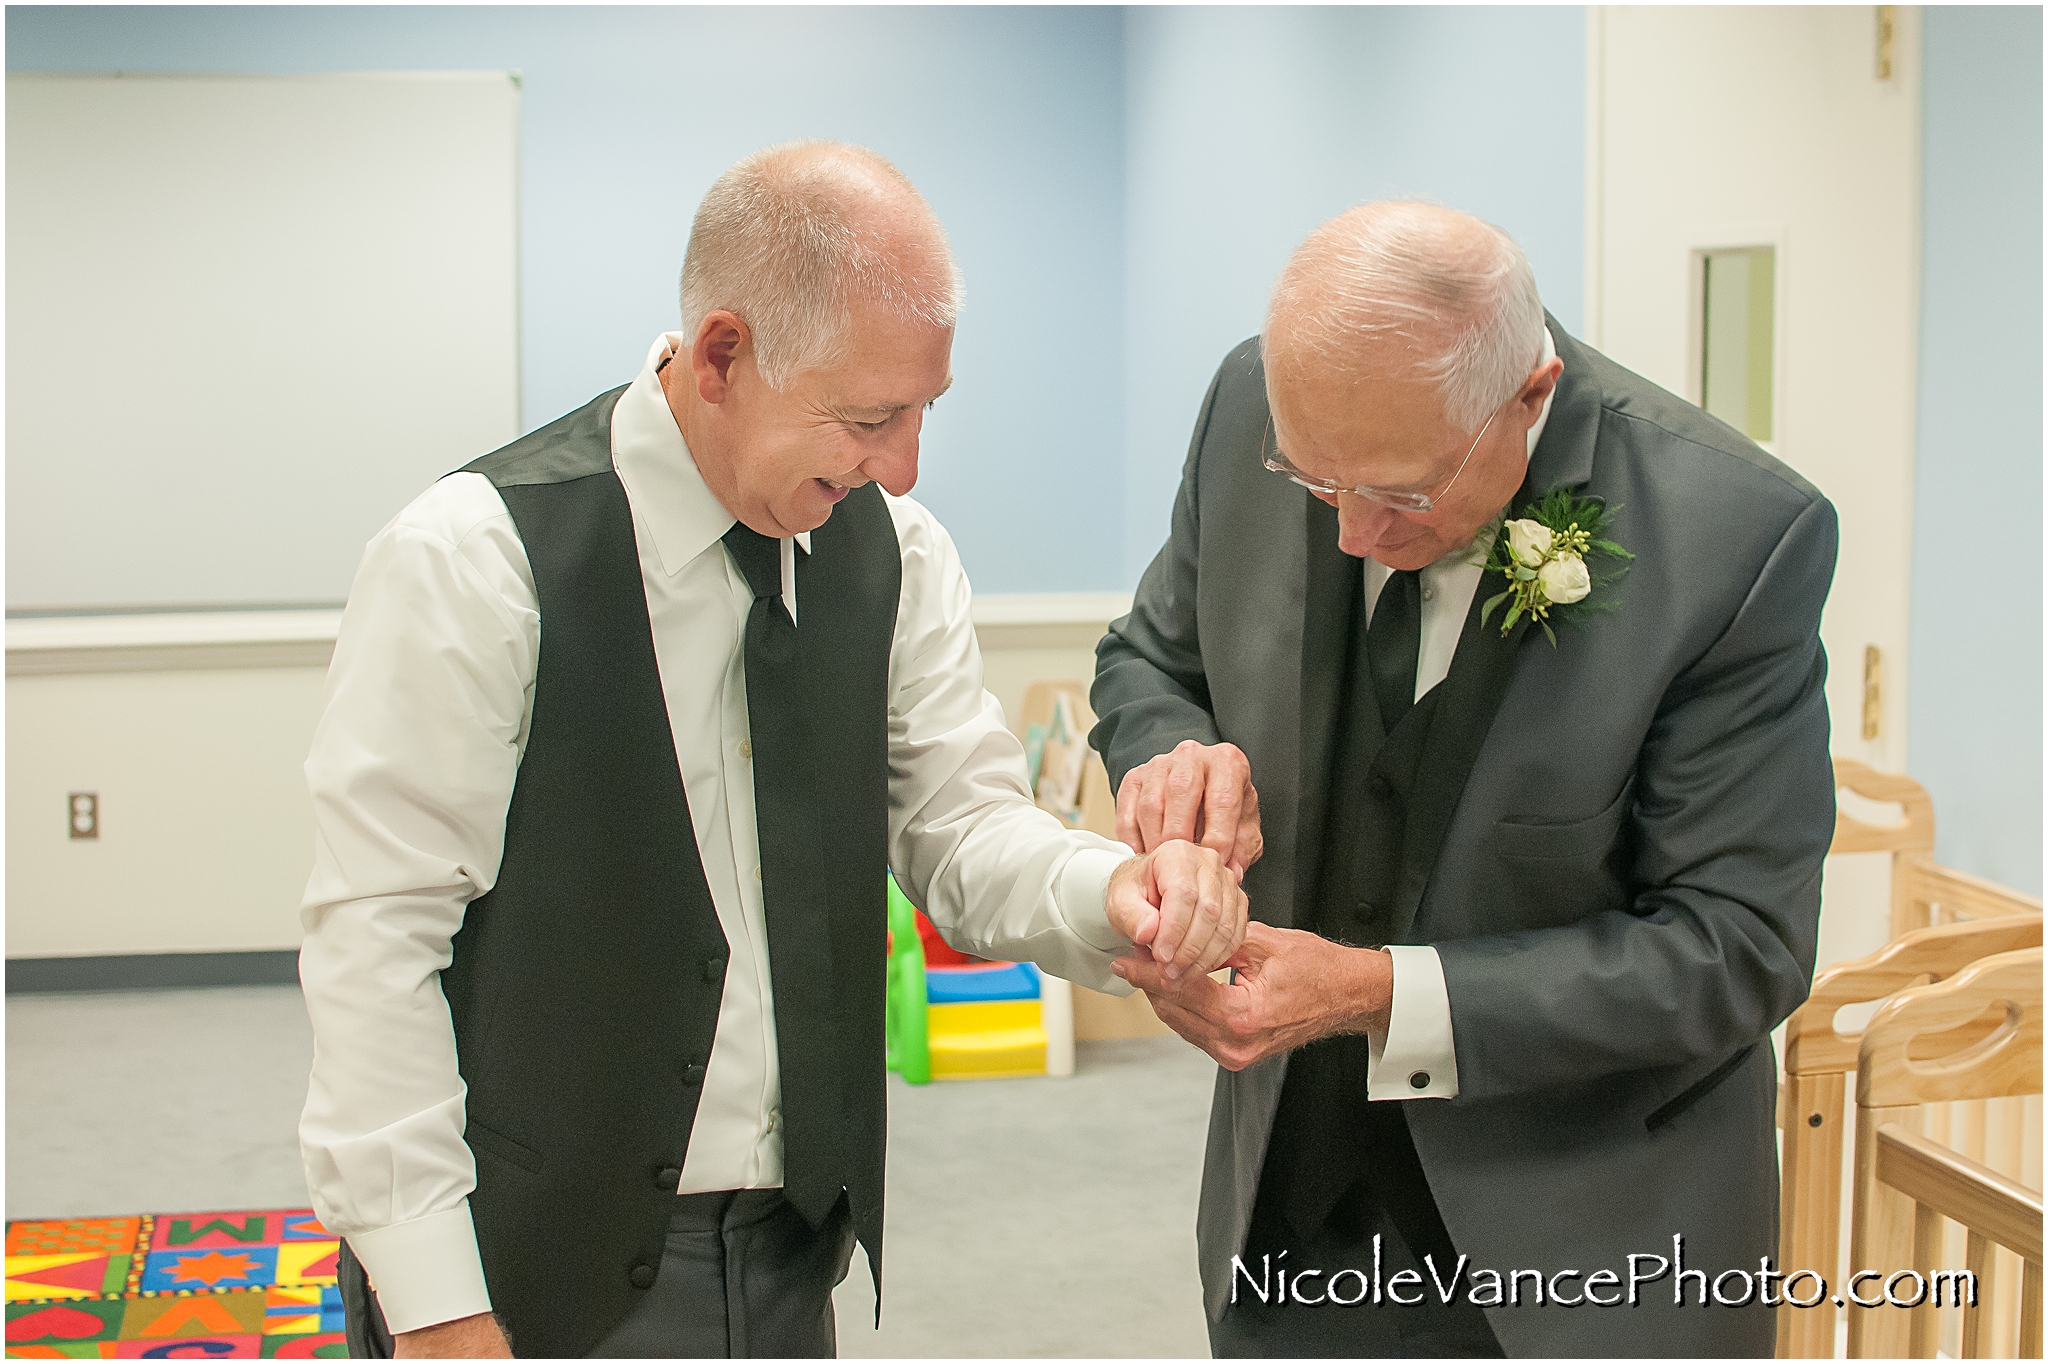 The bride's dad helps the groom with his cufflinks.